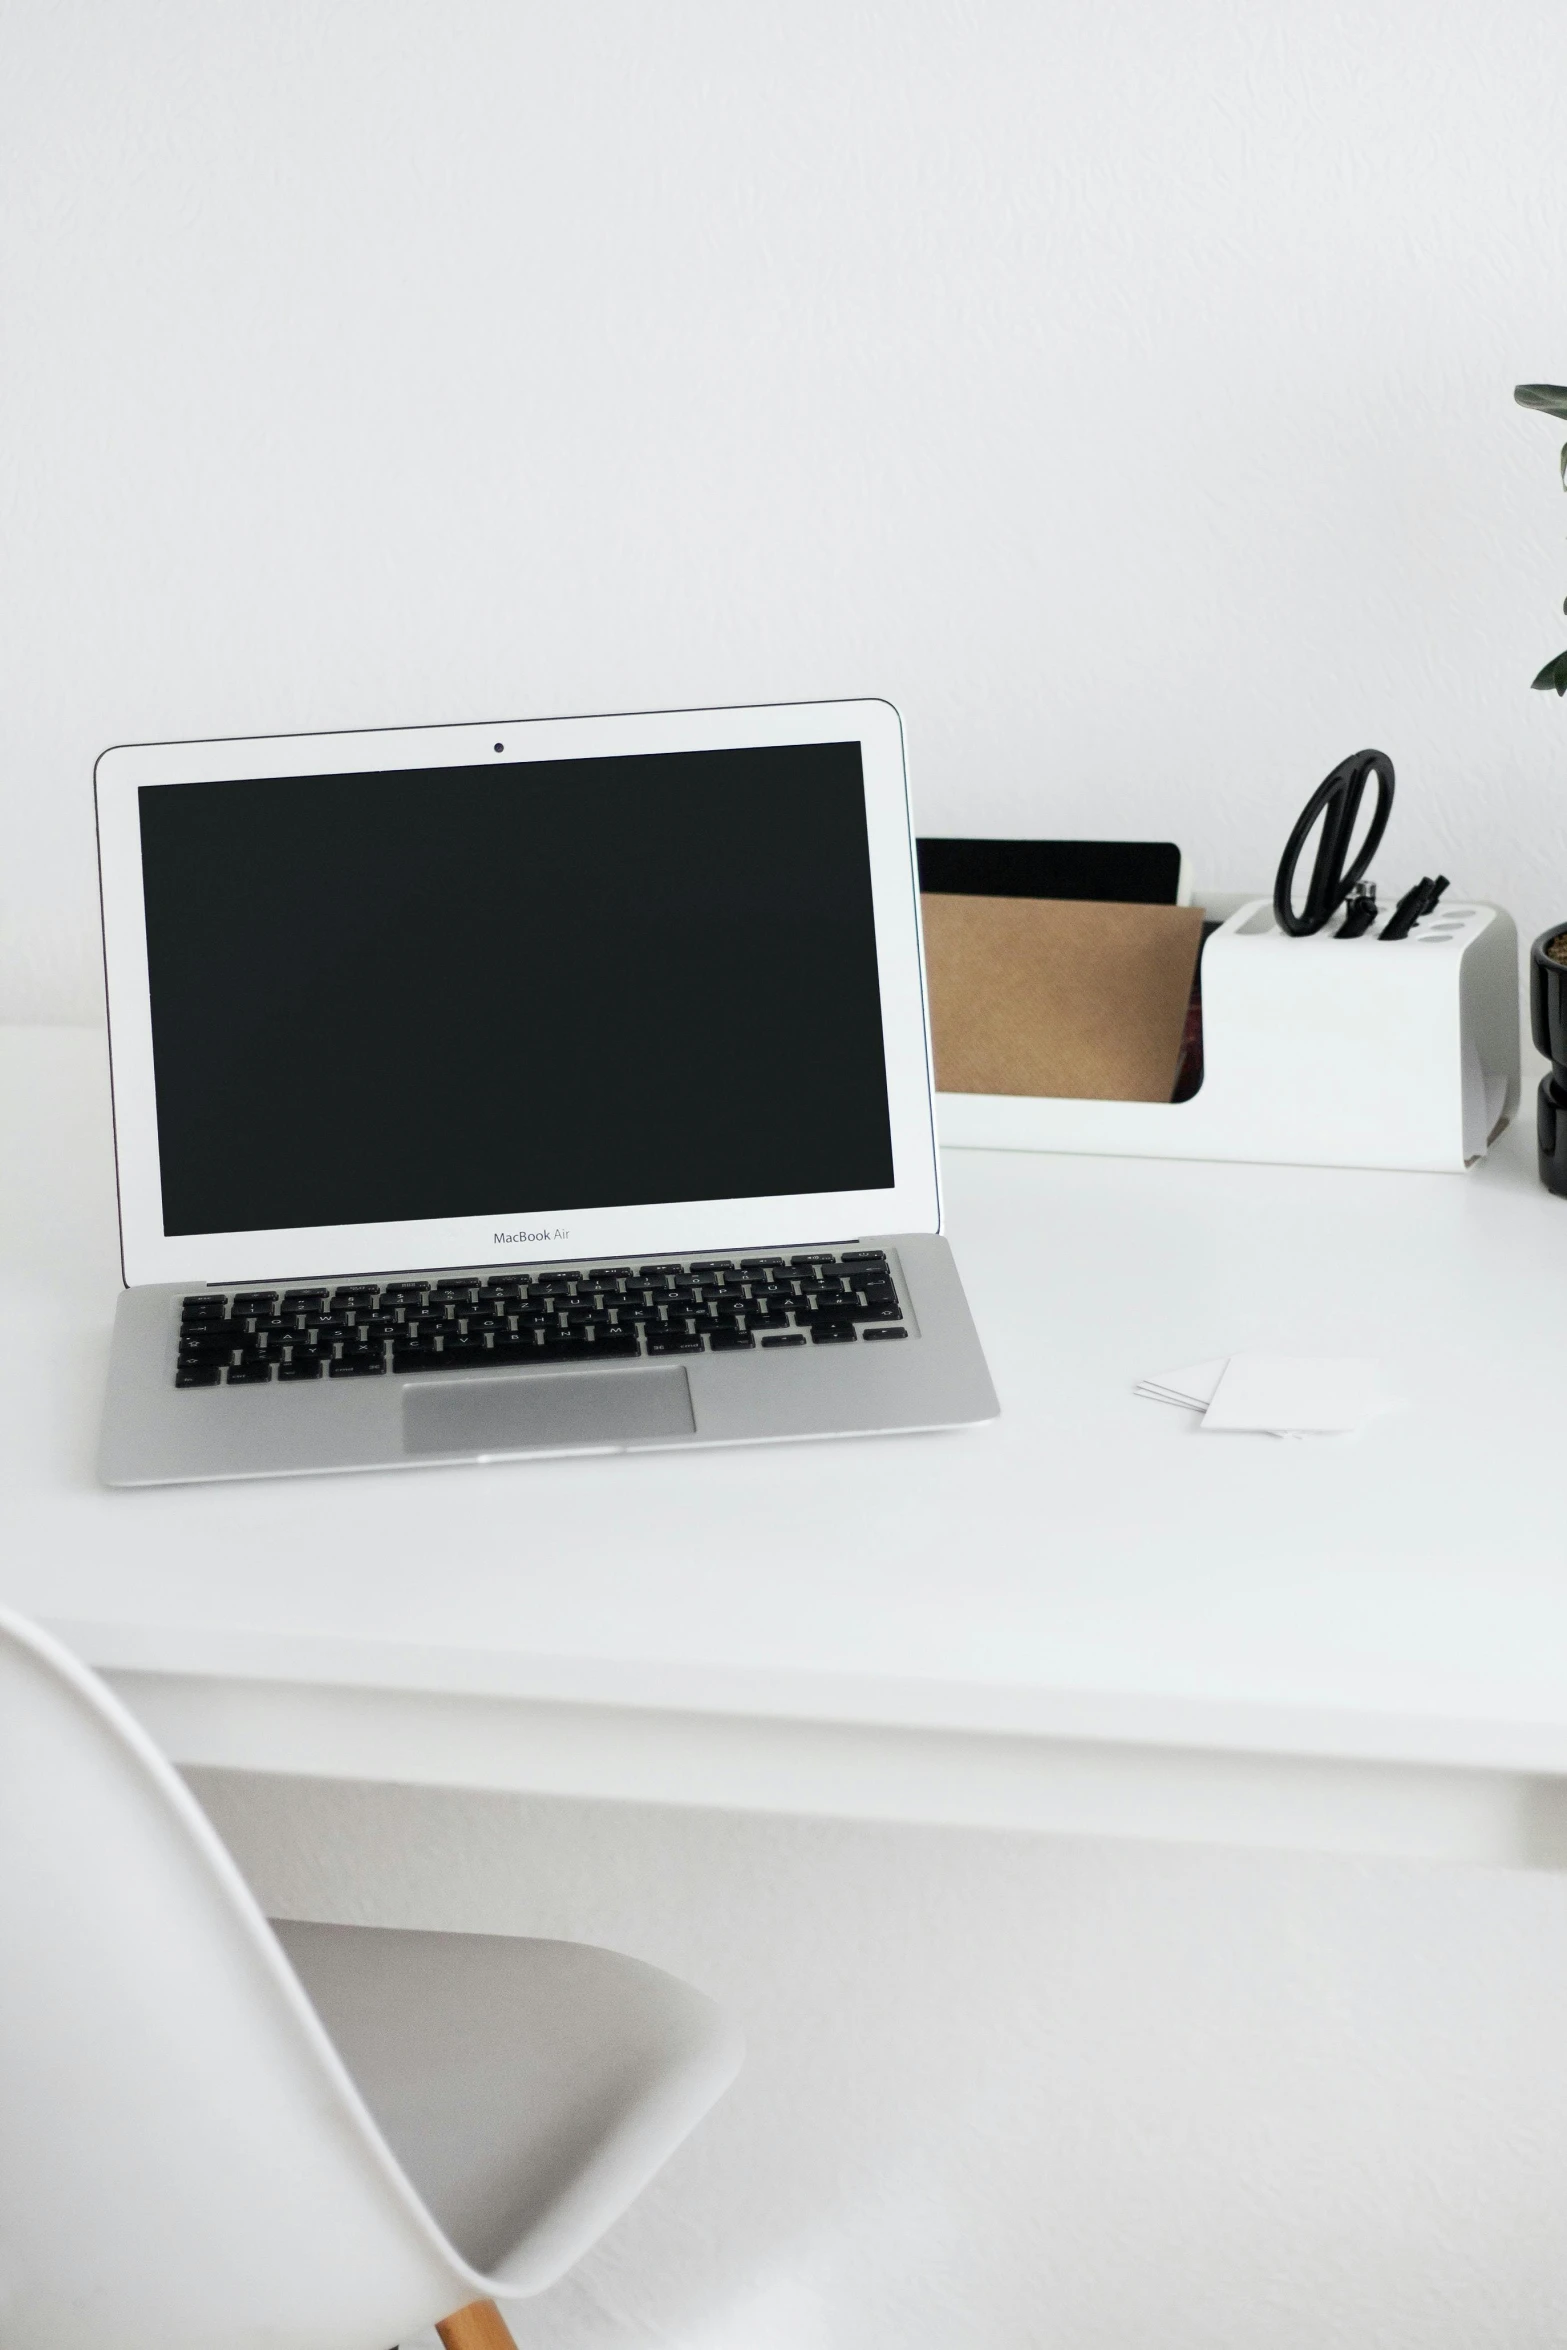 a laptop computer sitting on top of a white desk, by Robbie Trevino, trending on unsplash, dwell, curated collections, maintenance photo, white